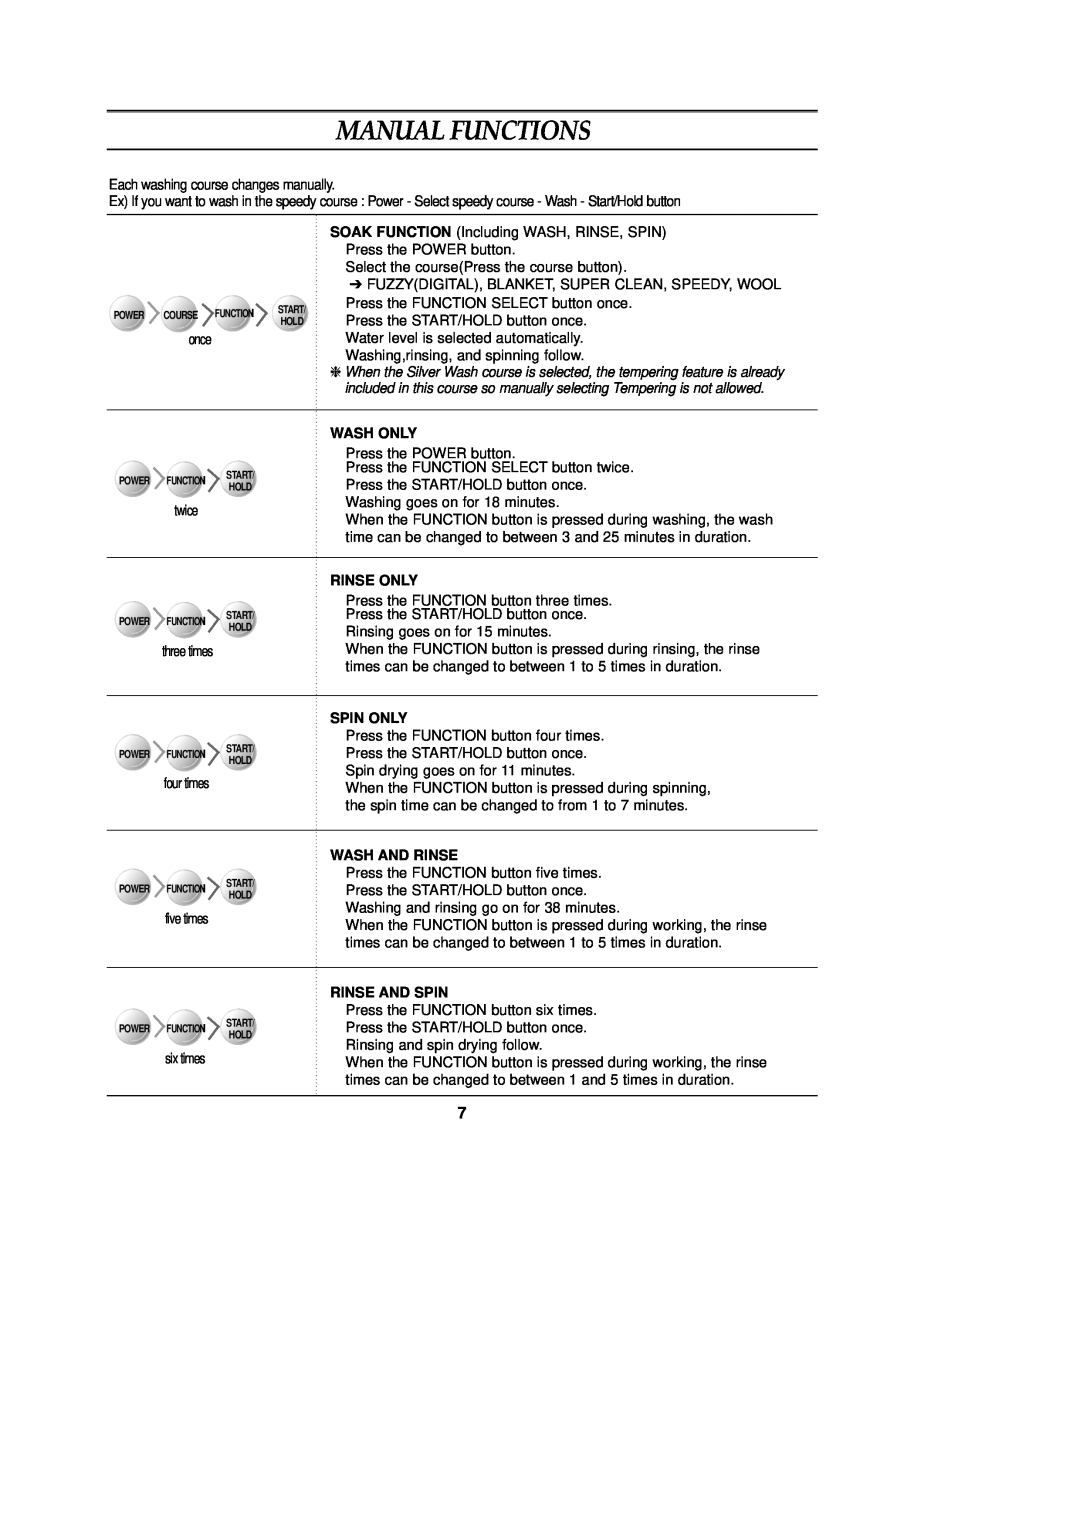 Samsung DC68-02154A user manual Manual Functions, Wash Only, Rinse Only, Spin Only, Wash And Rinse, Rinse And Spin 